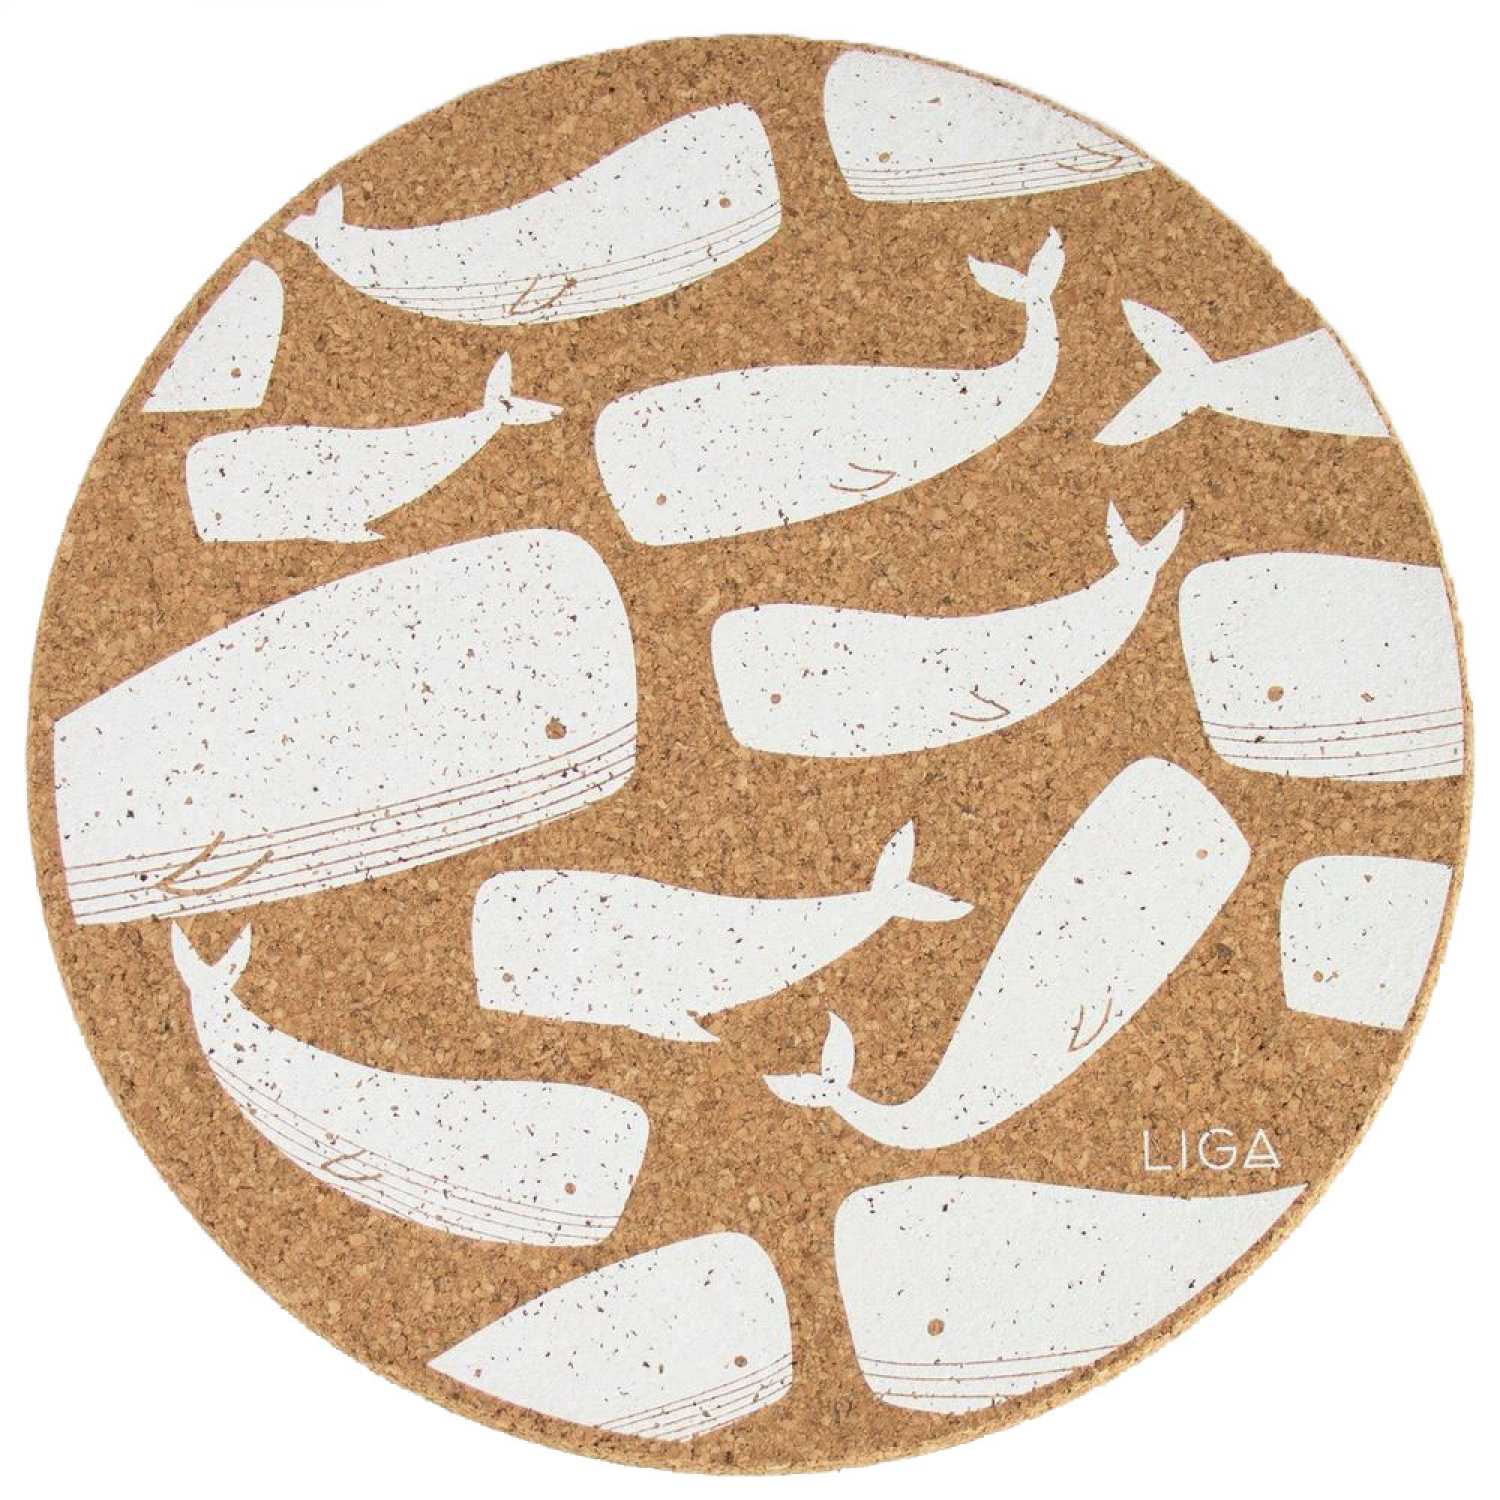 LIGA Cork Whale Placemats - Set of 4